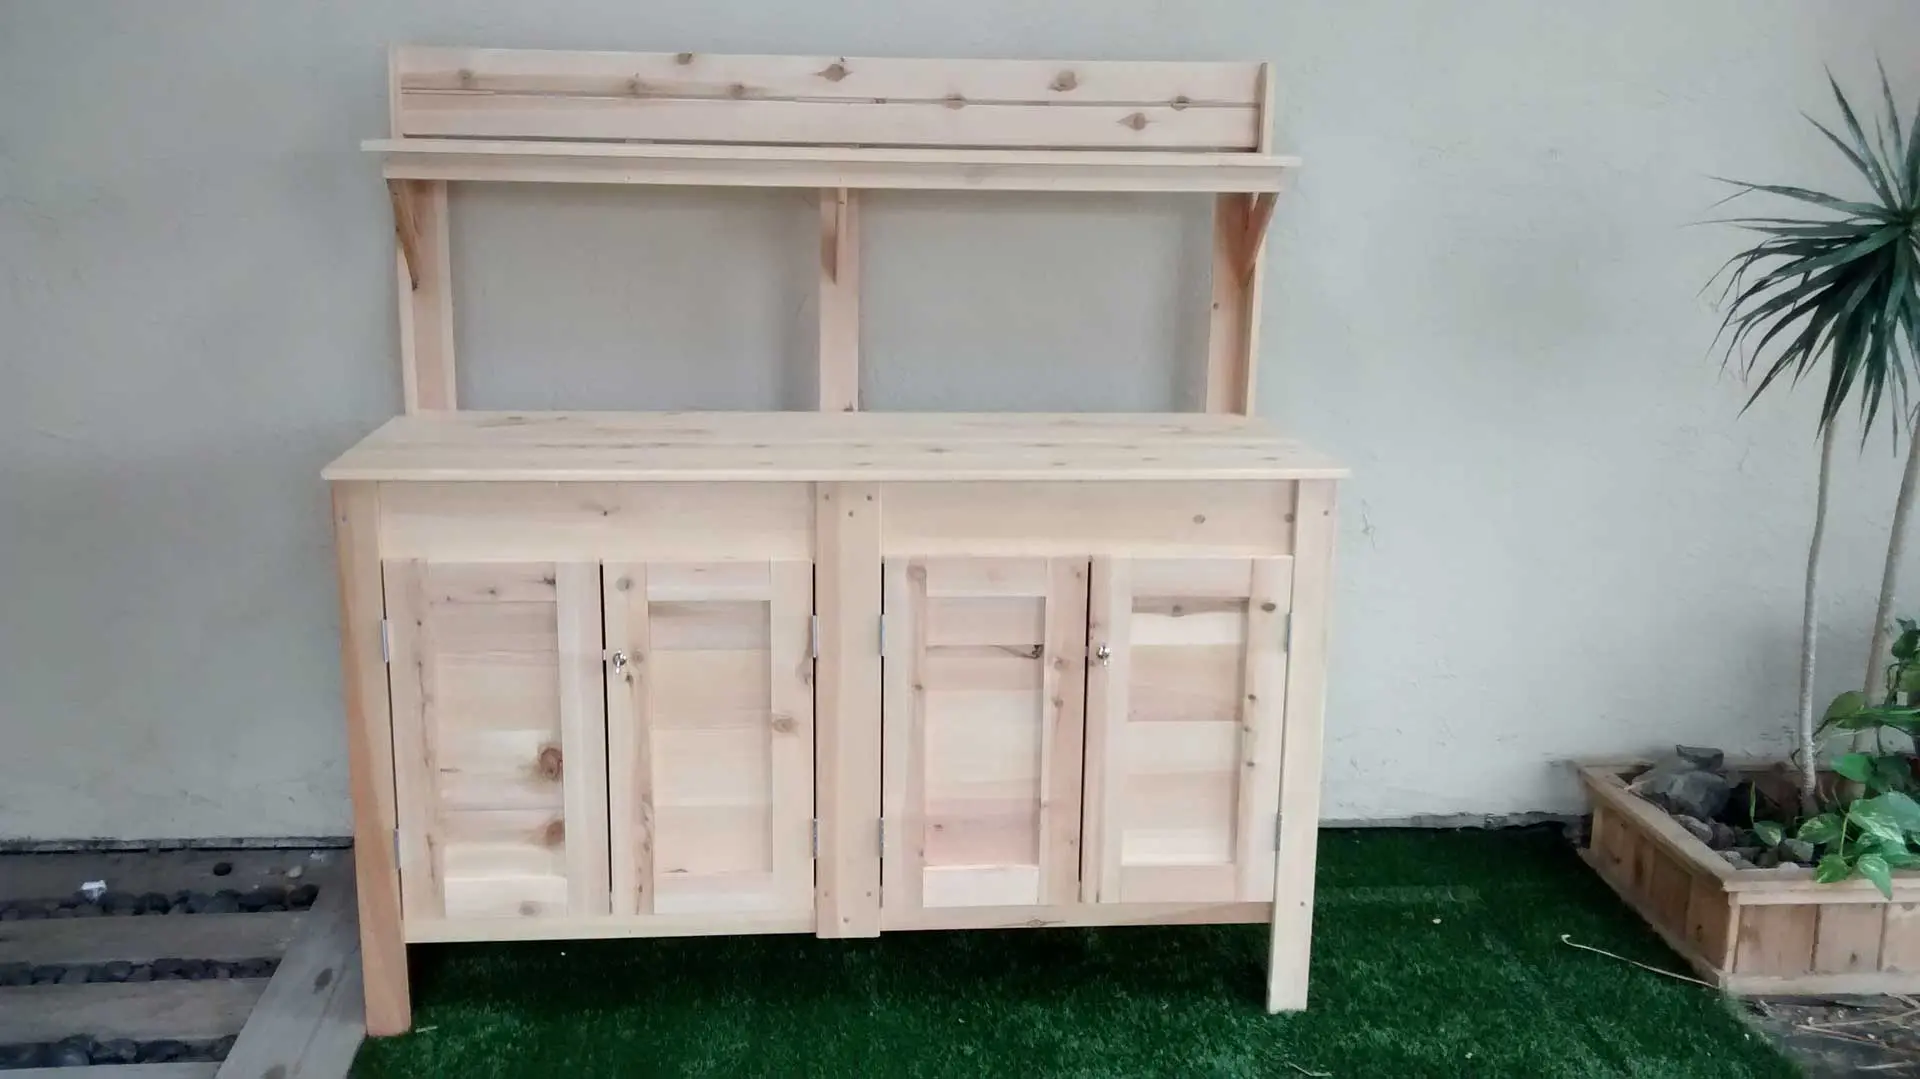 A wooden cabinet with two doors and one shelf.